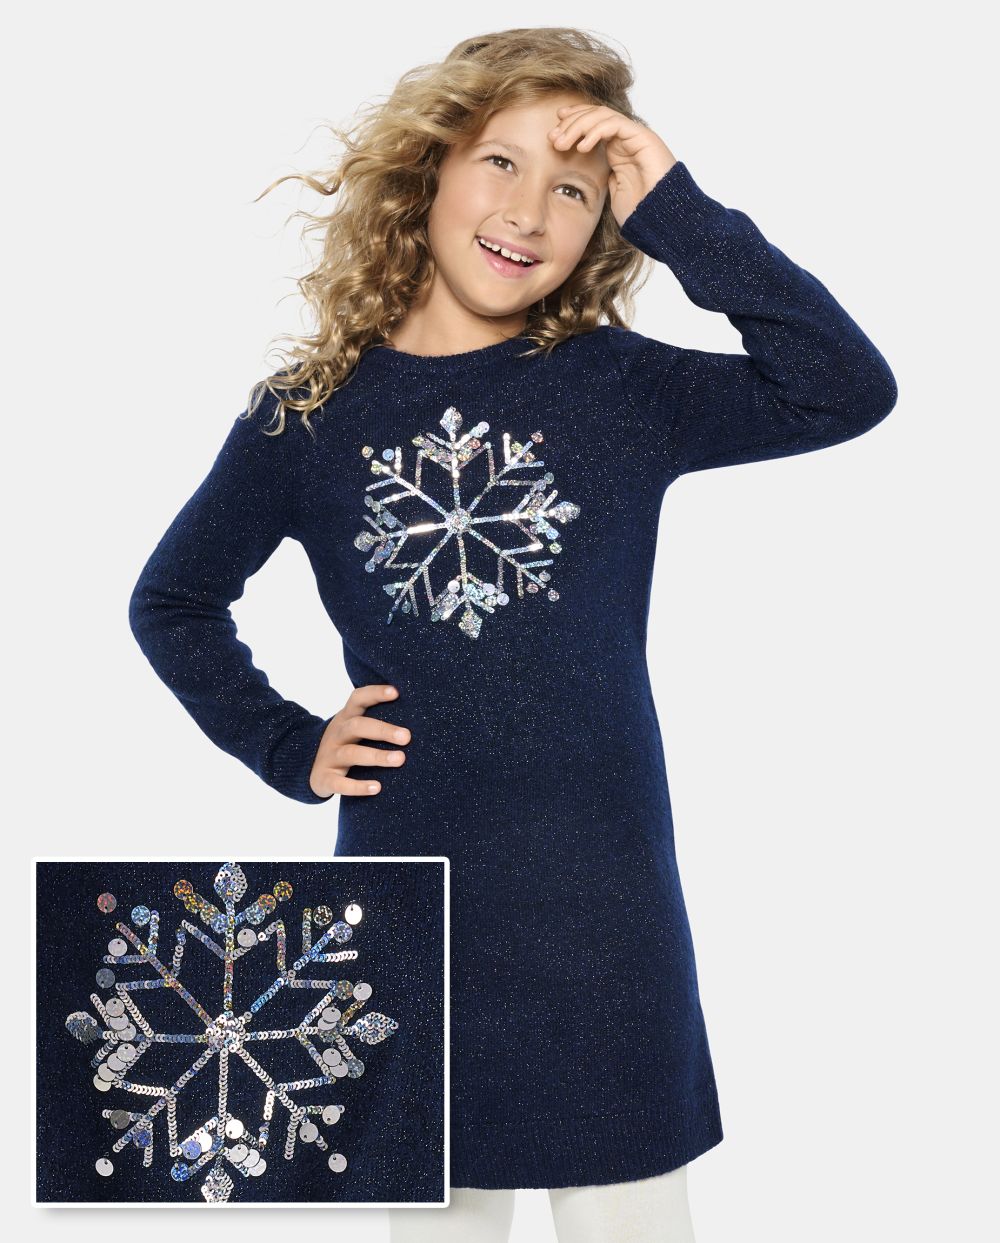 Tall Girls Above the Knee Long Sleeves Sweater Sequined Crew Neck Dress